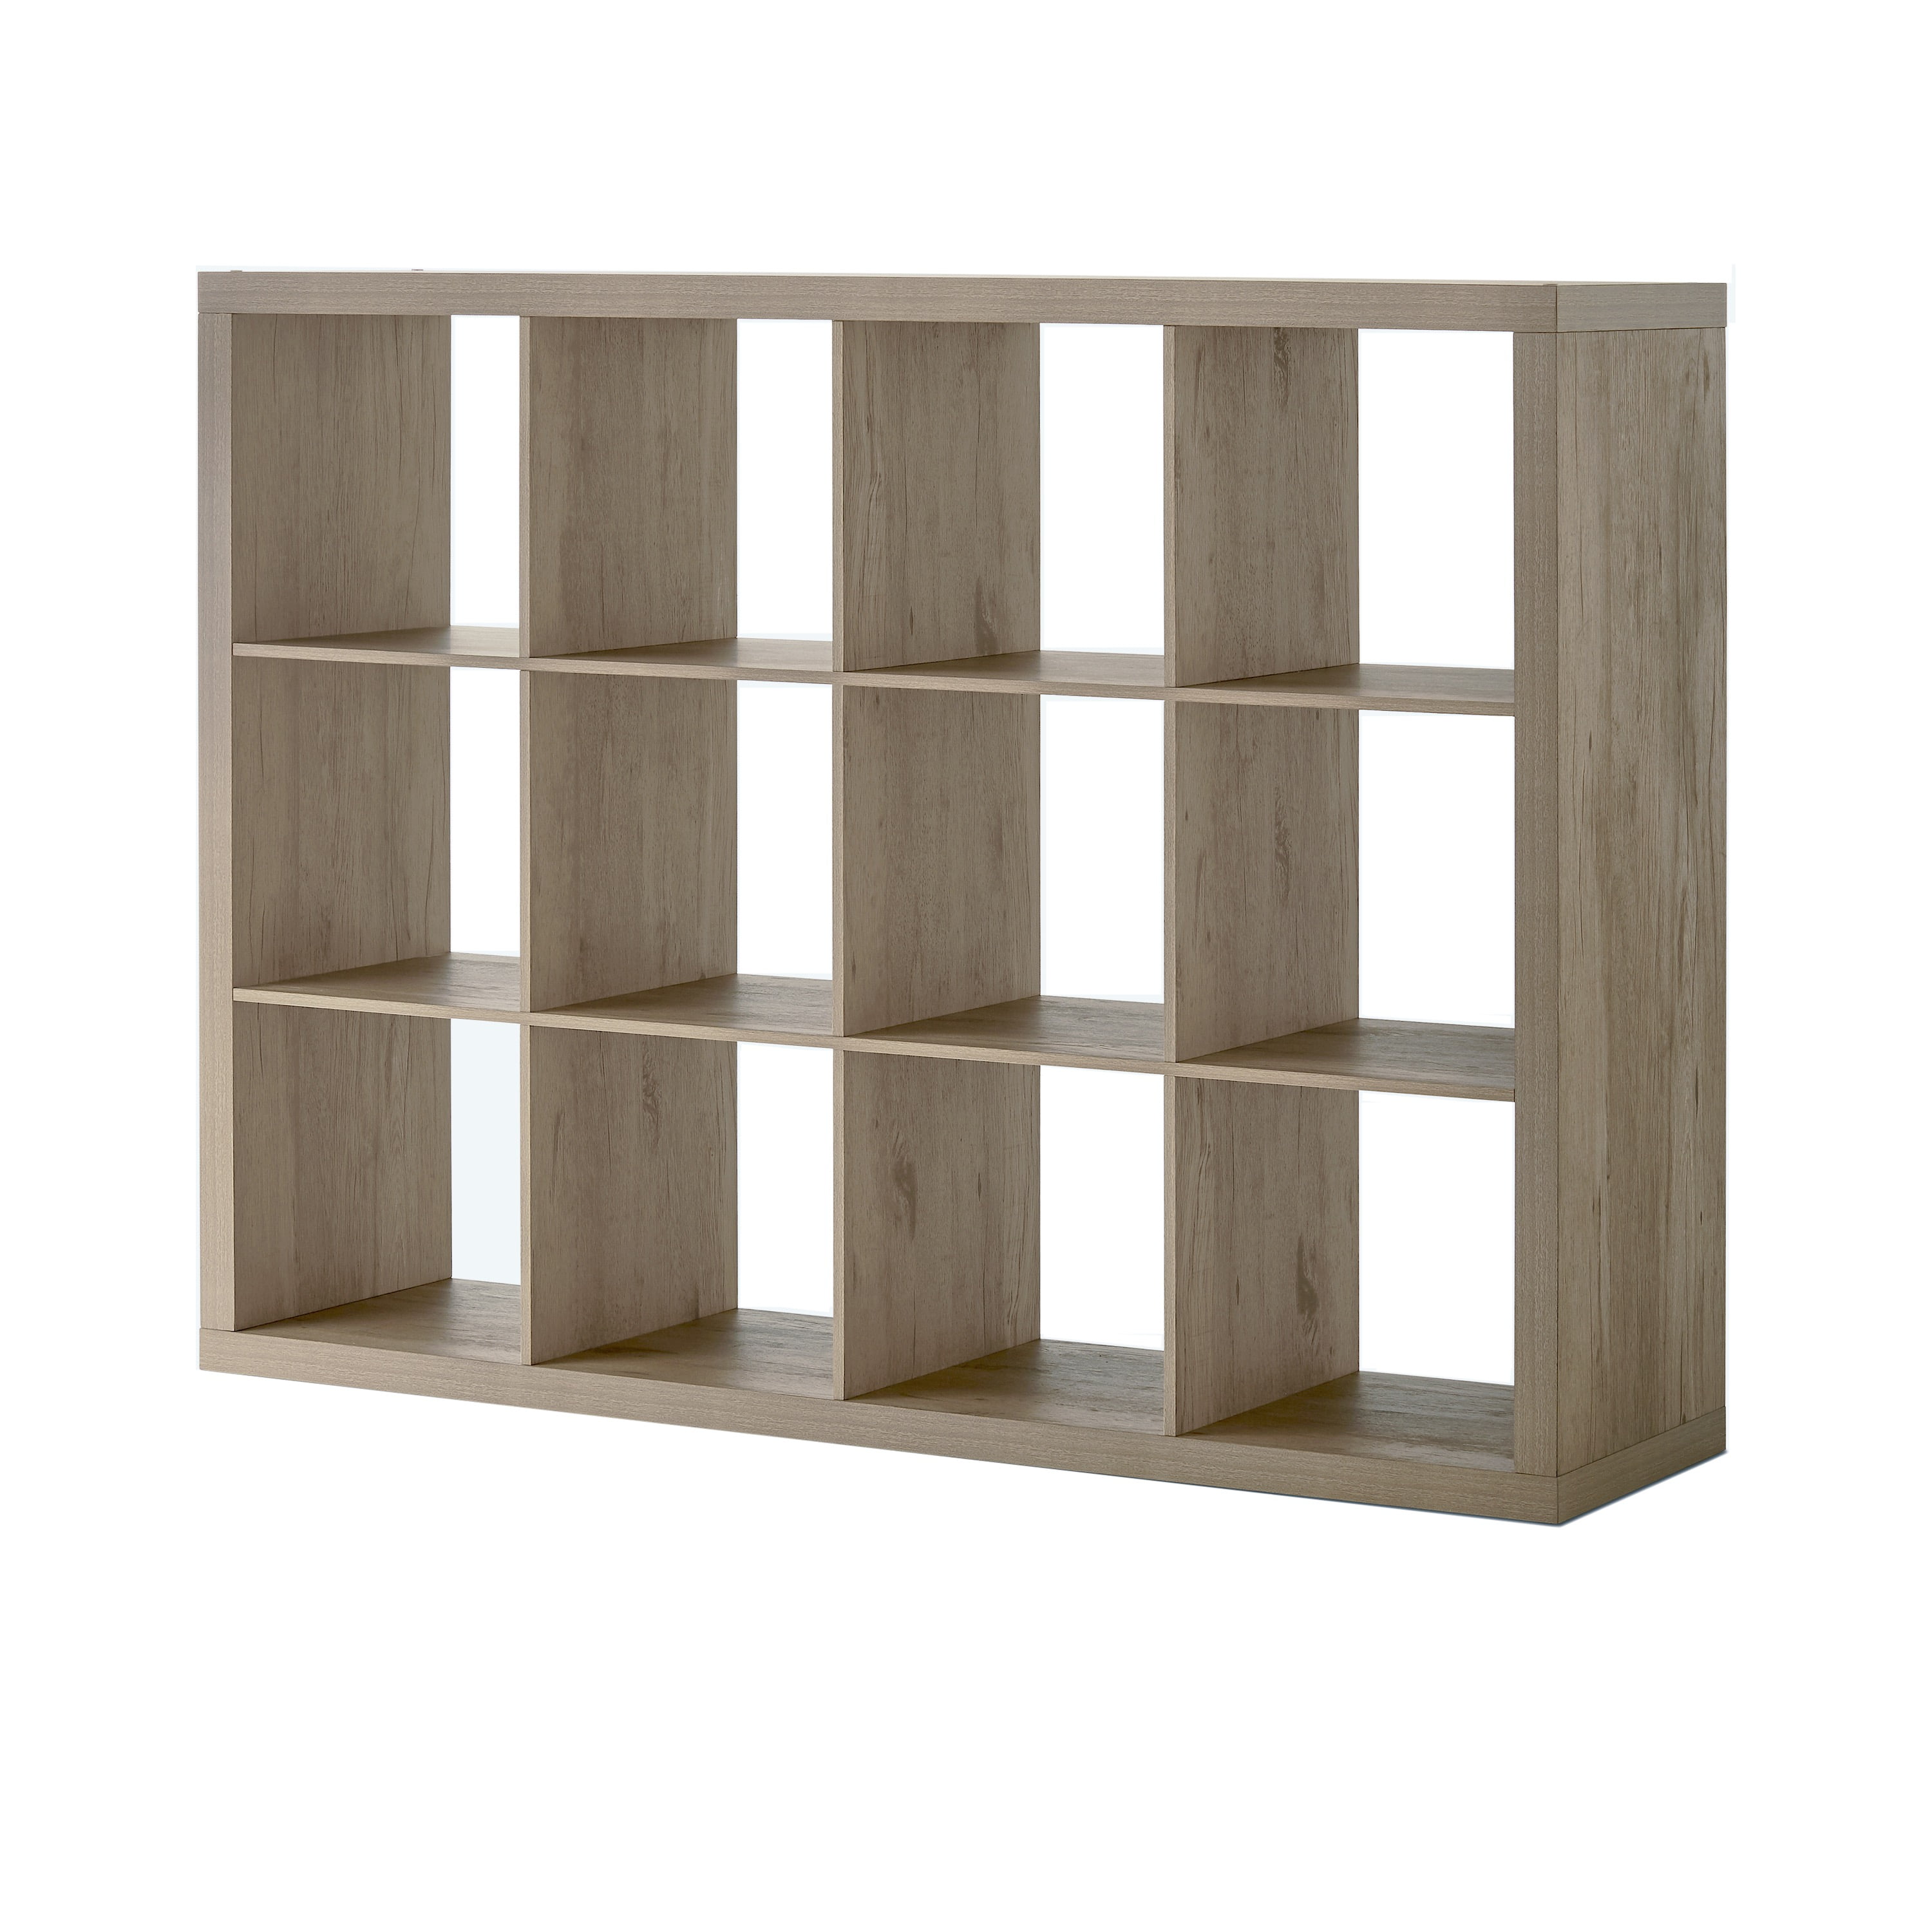 WOODEN WALL CUBE SHELVE STORAGE BOOK CASE RACK WALL MOUNTED ORGANIZER CRAFT 